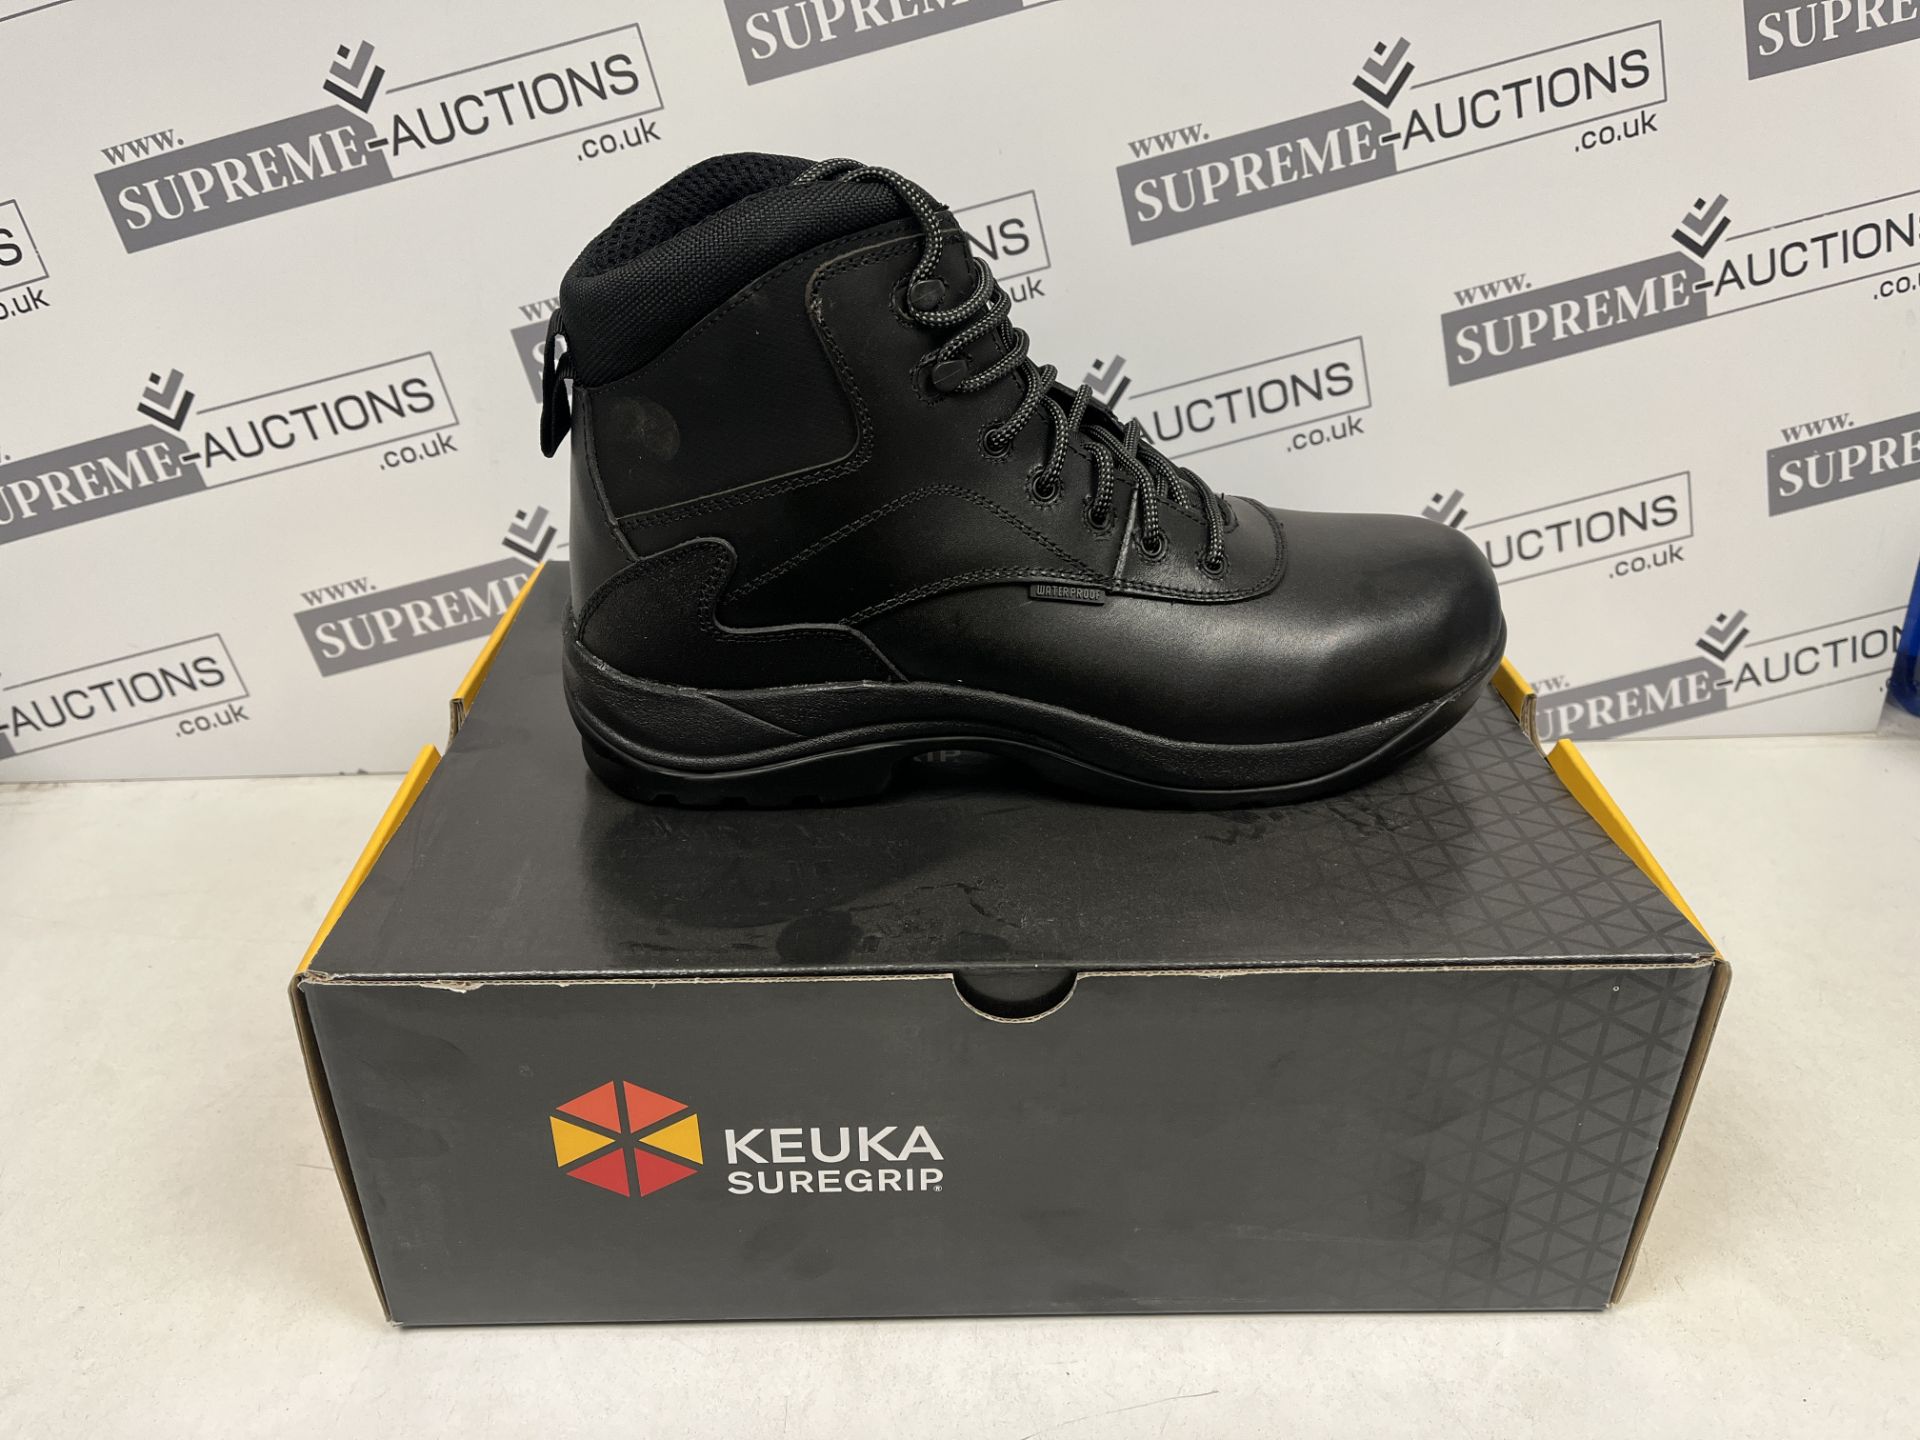 4 X BRAND NEW KEUKA SURE GRIP PROFESSIONAL WORK BOOTS IN VARIOUS STYLES AND SIZES R2-7